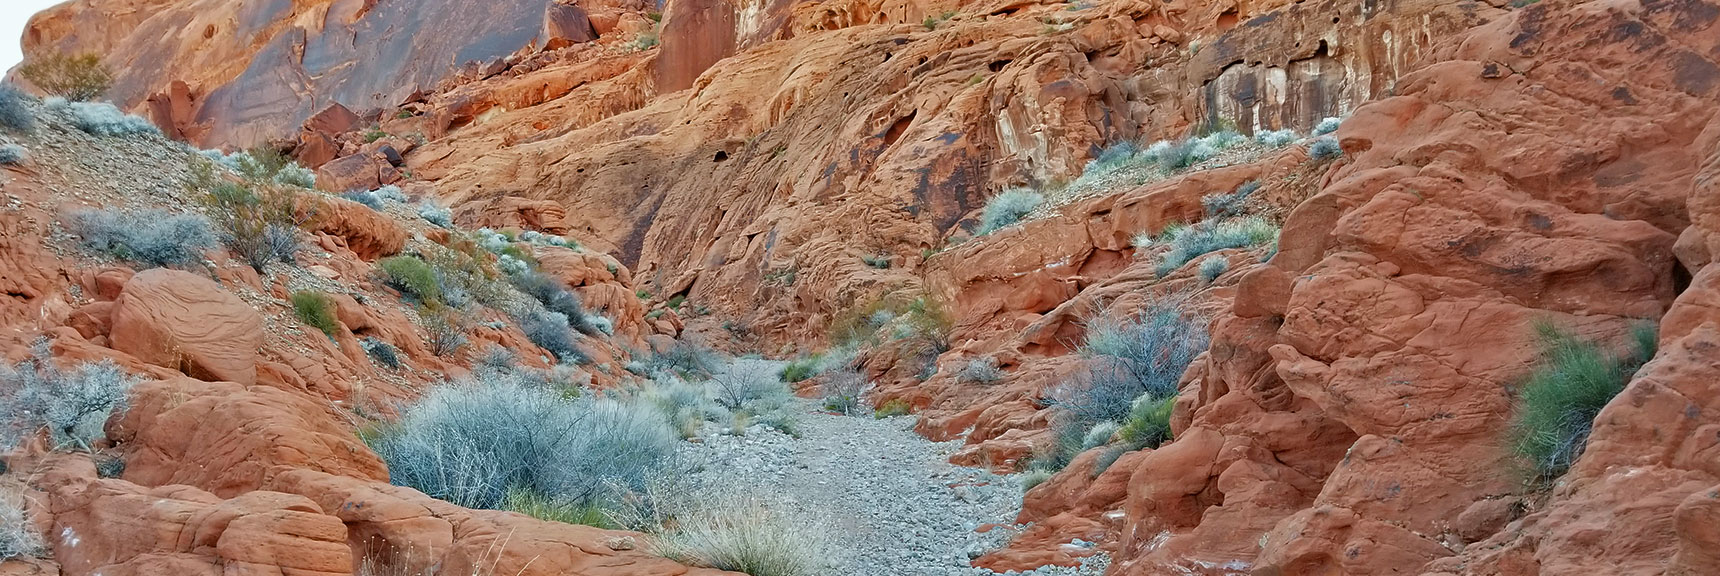 Descending Through the Northern Canyon Wash Prospect Trail in Valley of Fire State Park, Nevada